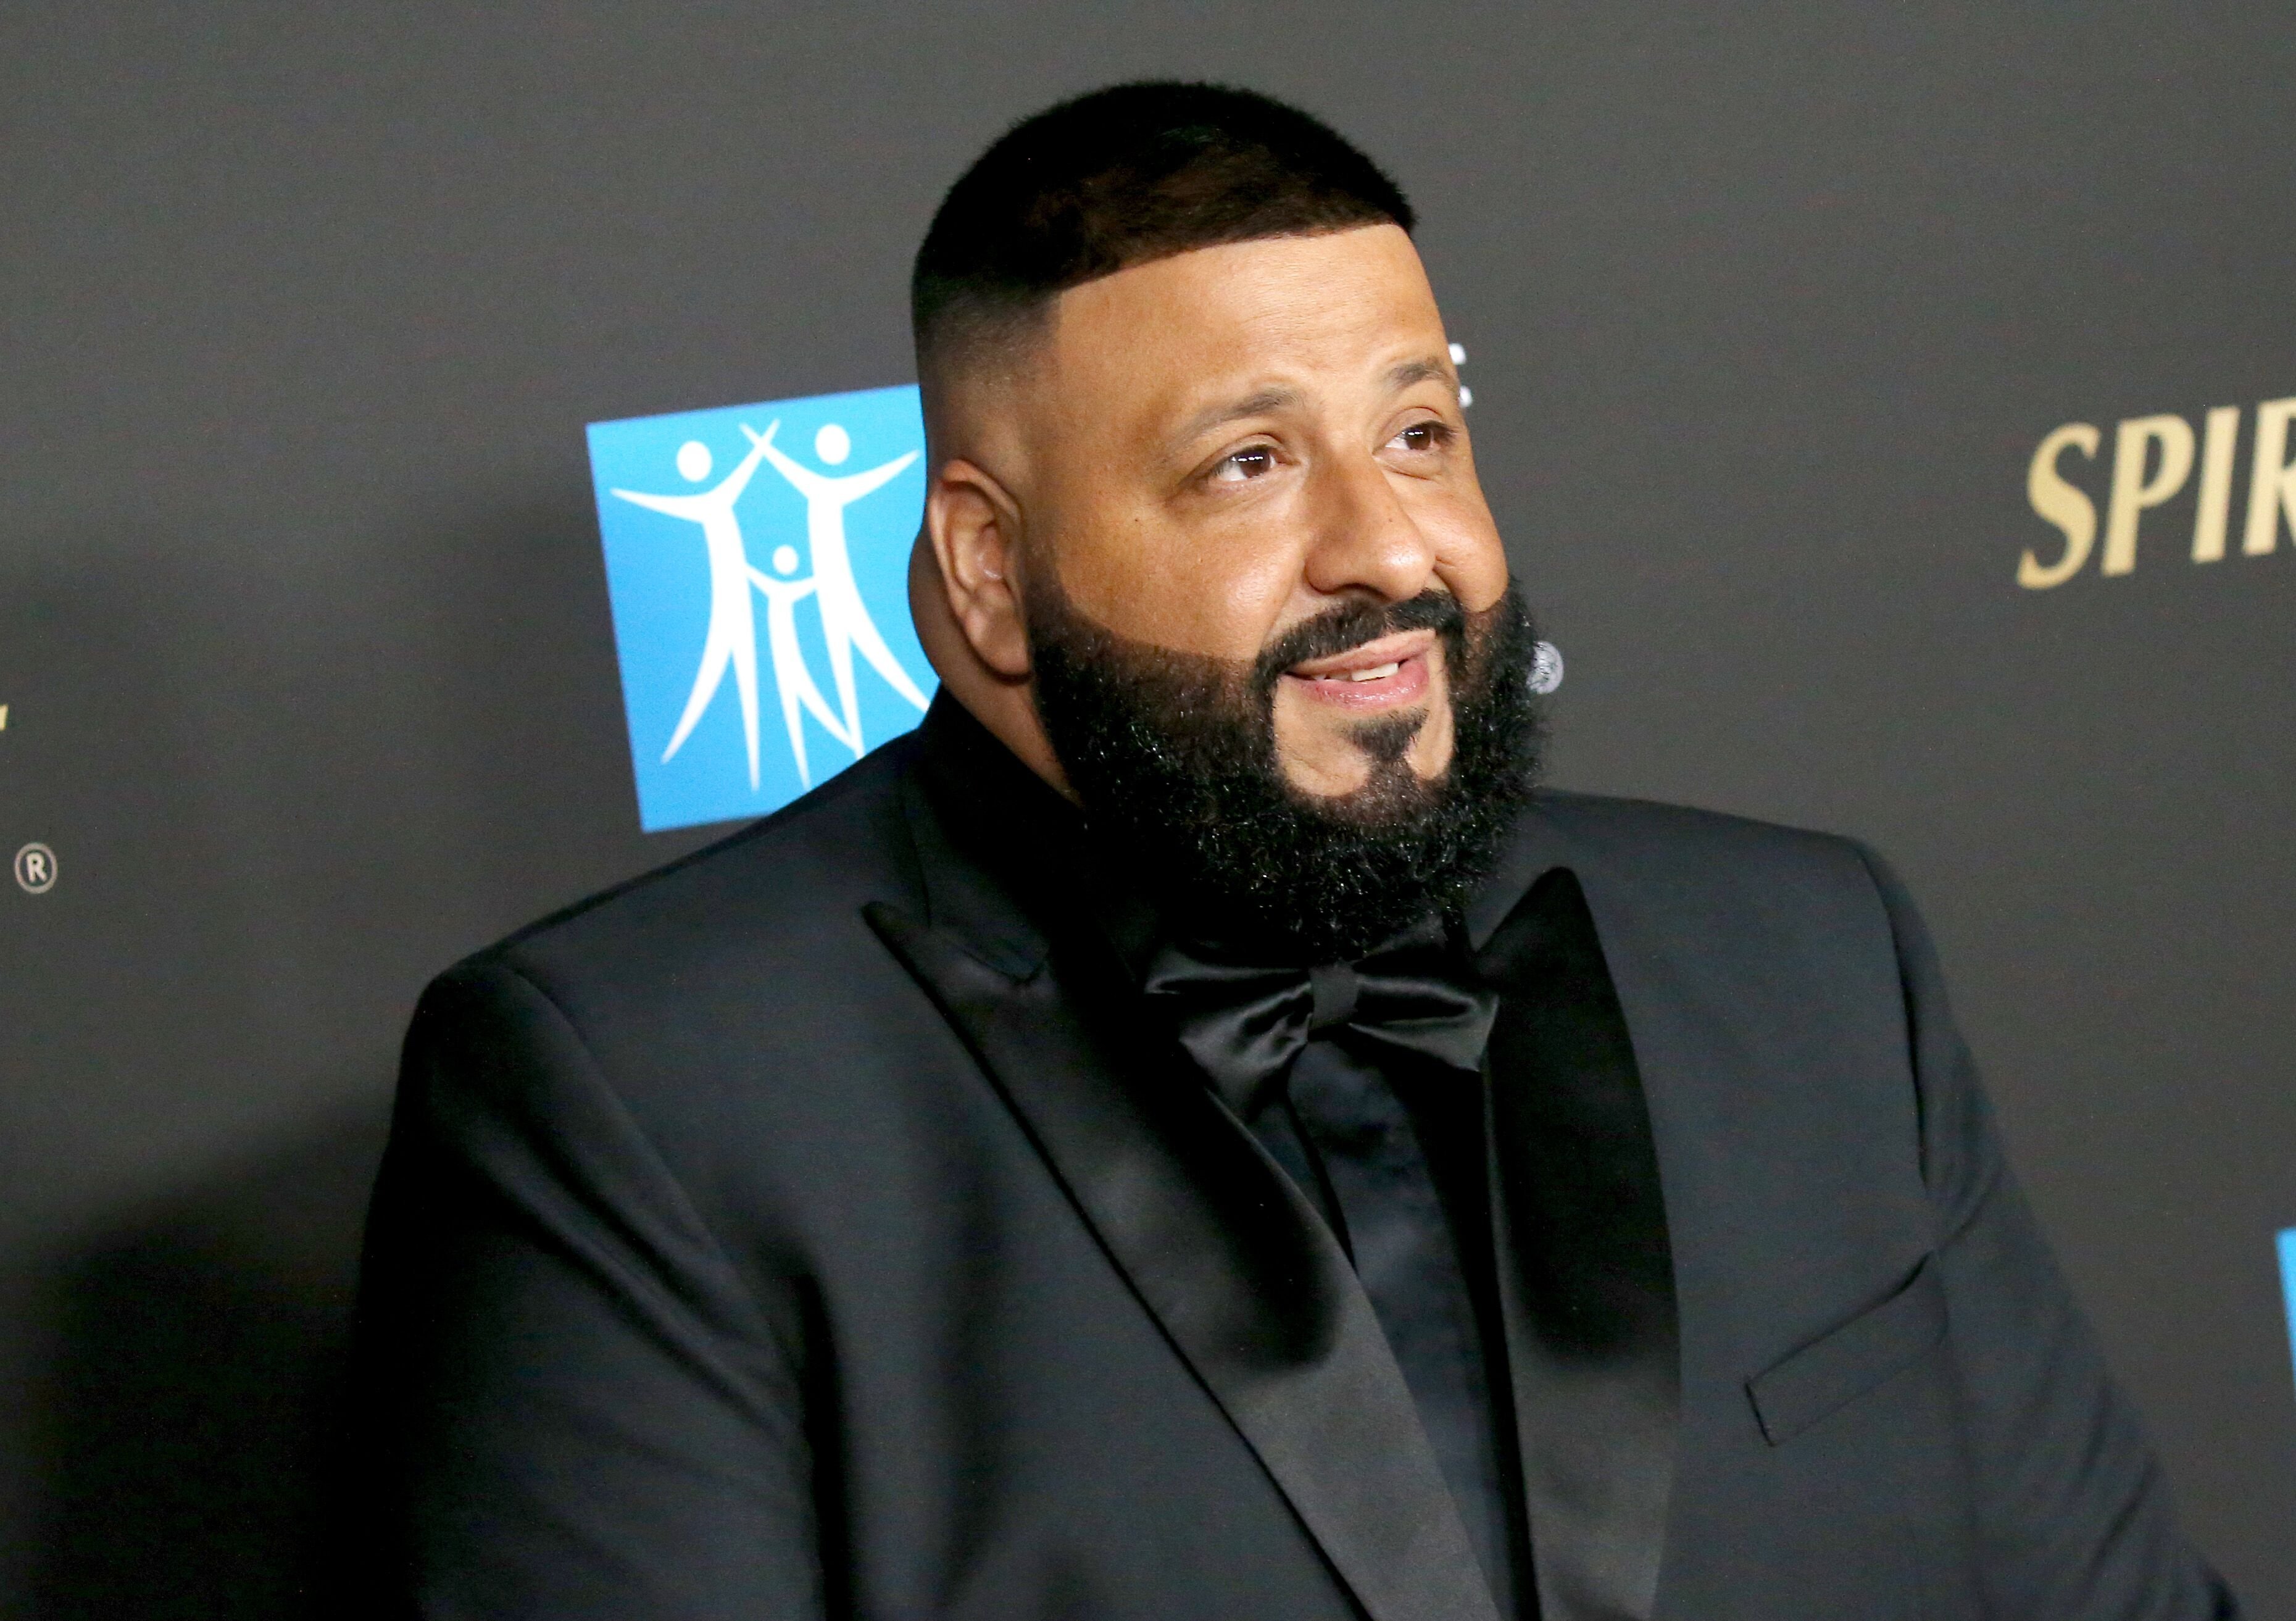 DJ Khaled attends the City Of Hope's Spirit of Life 2019 Gala held at The Barker Hanger on October 10, 2019 in Santa Monica, California. | Photo: Getty Images